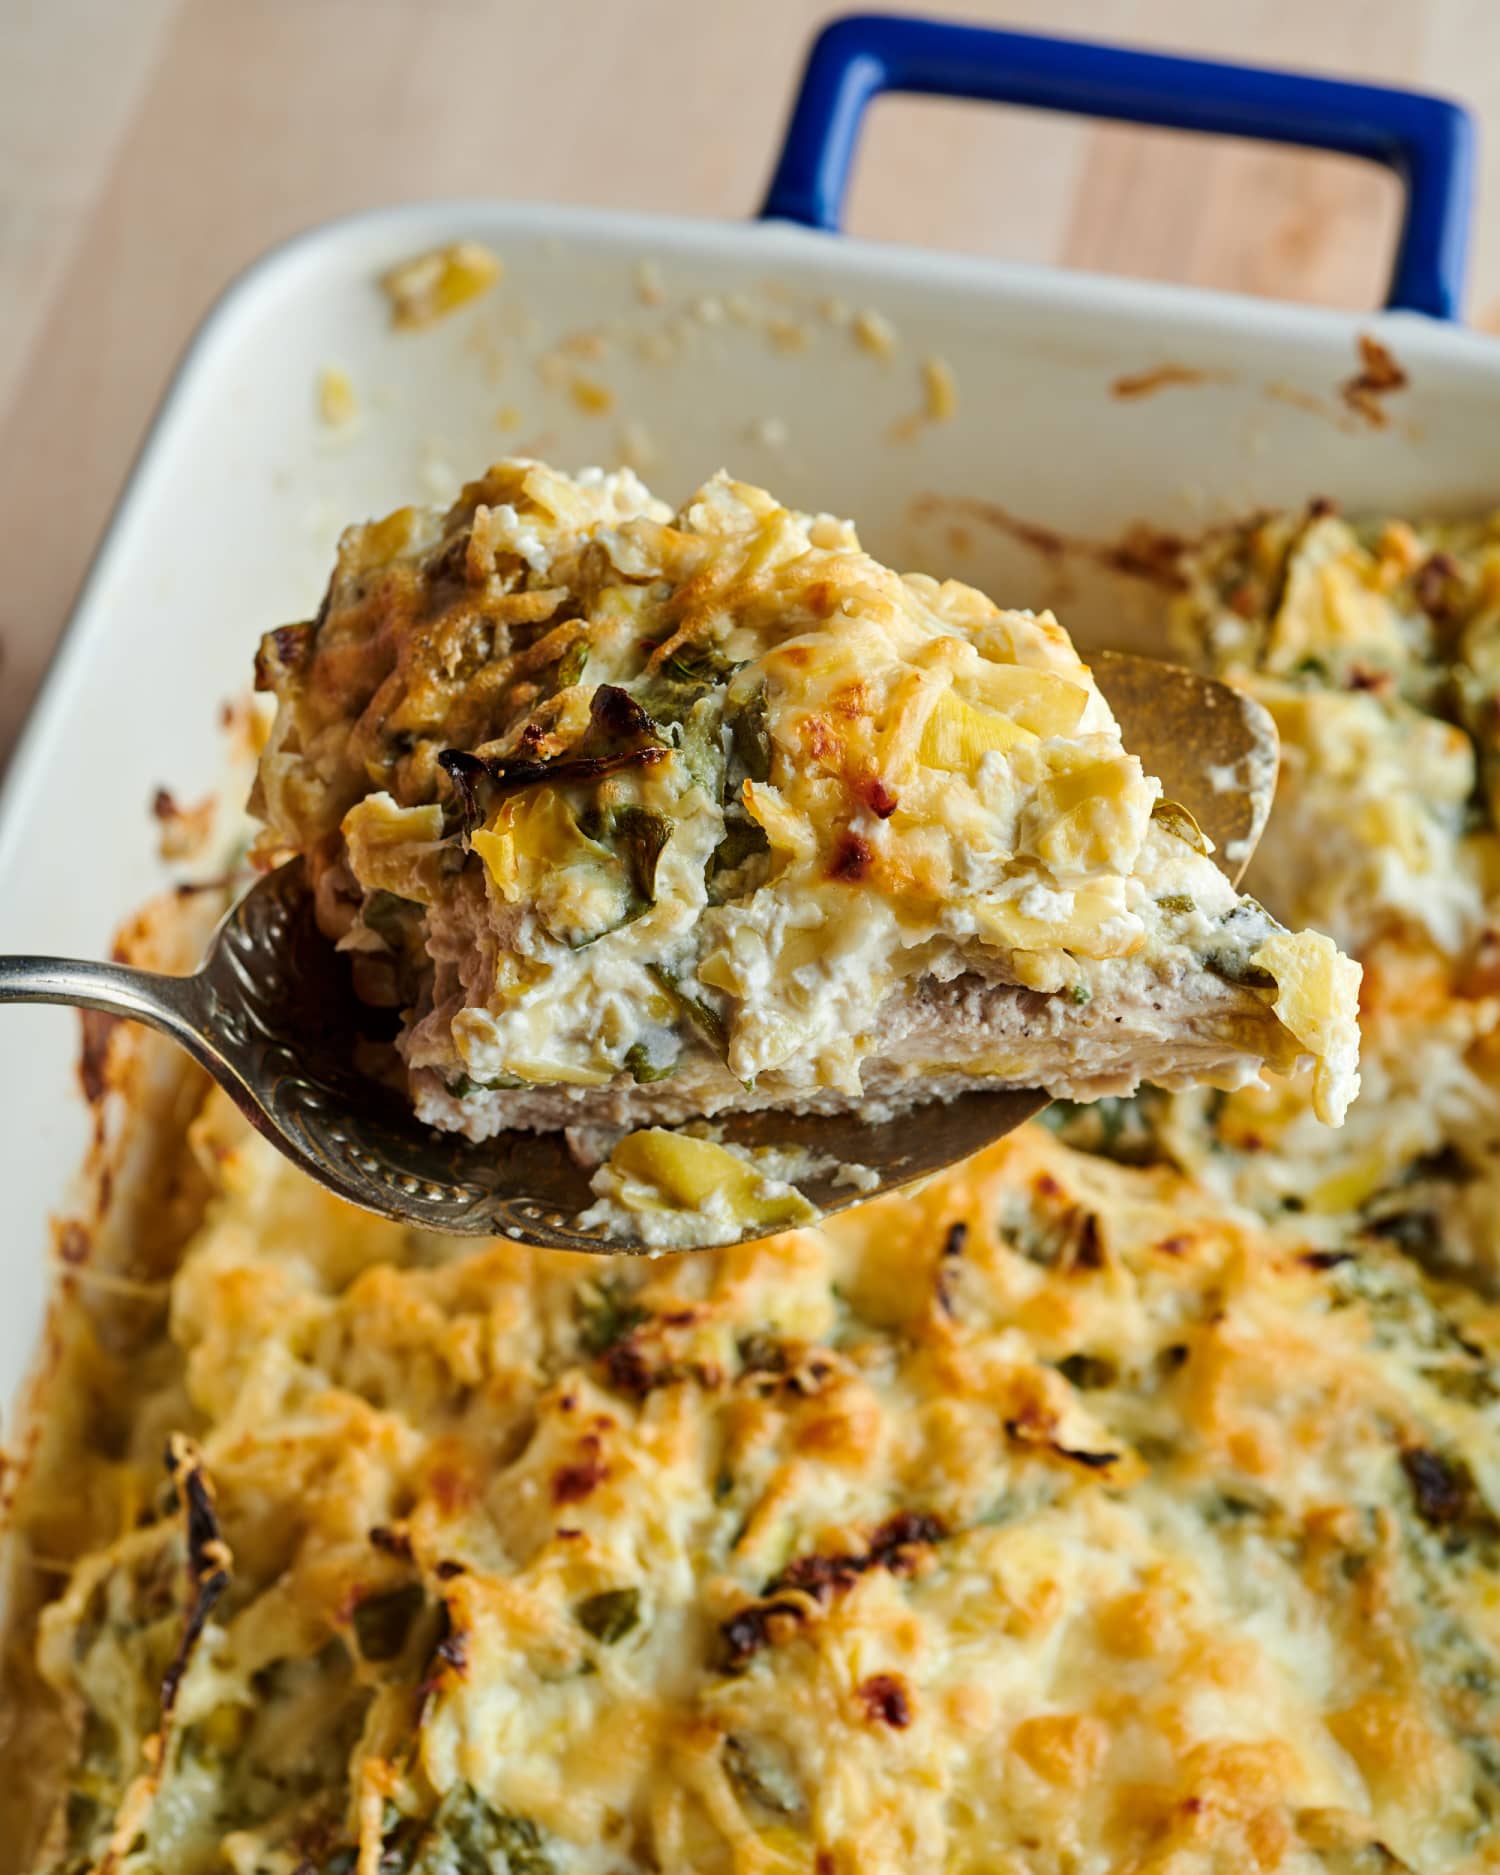 Spinach-Artichoke Baked Chicken Is an Instant Family Favorite